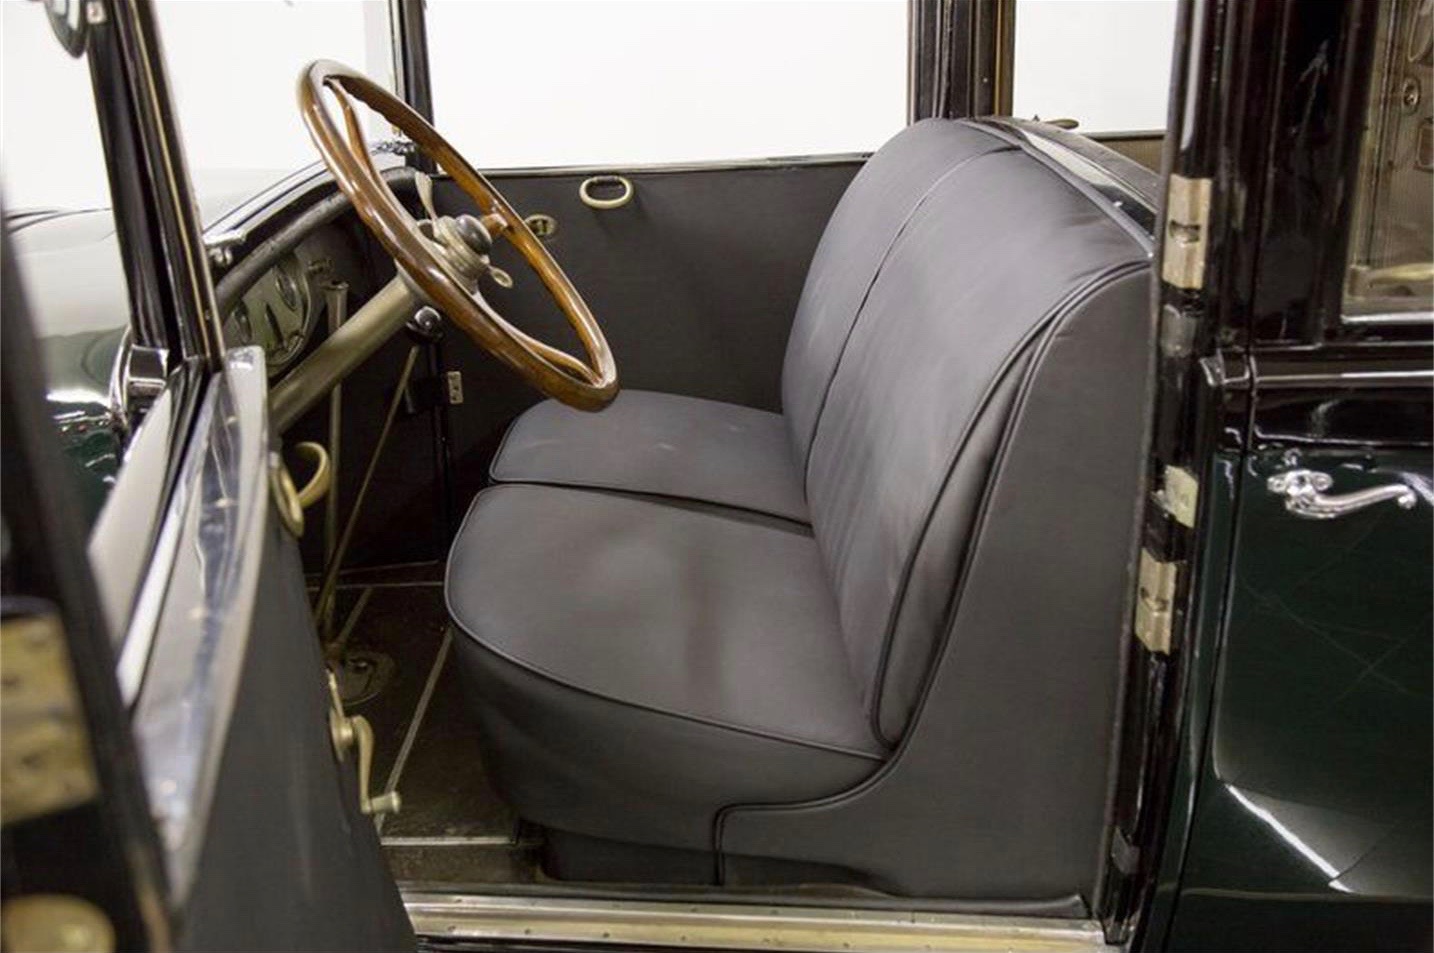 1929 Lincoln, Lincoln limo is rare, rarely driven, and a Full Classic, ClassicCars.com Journal